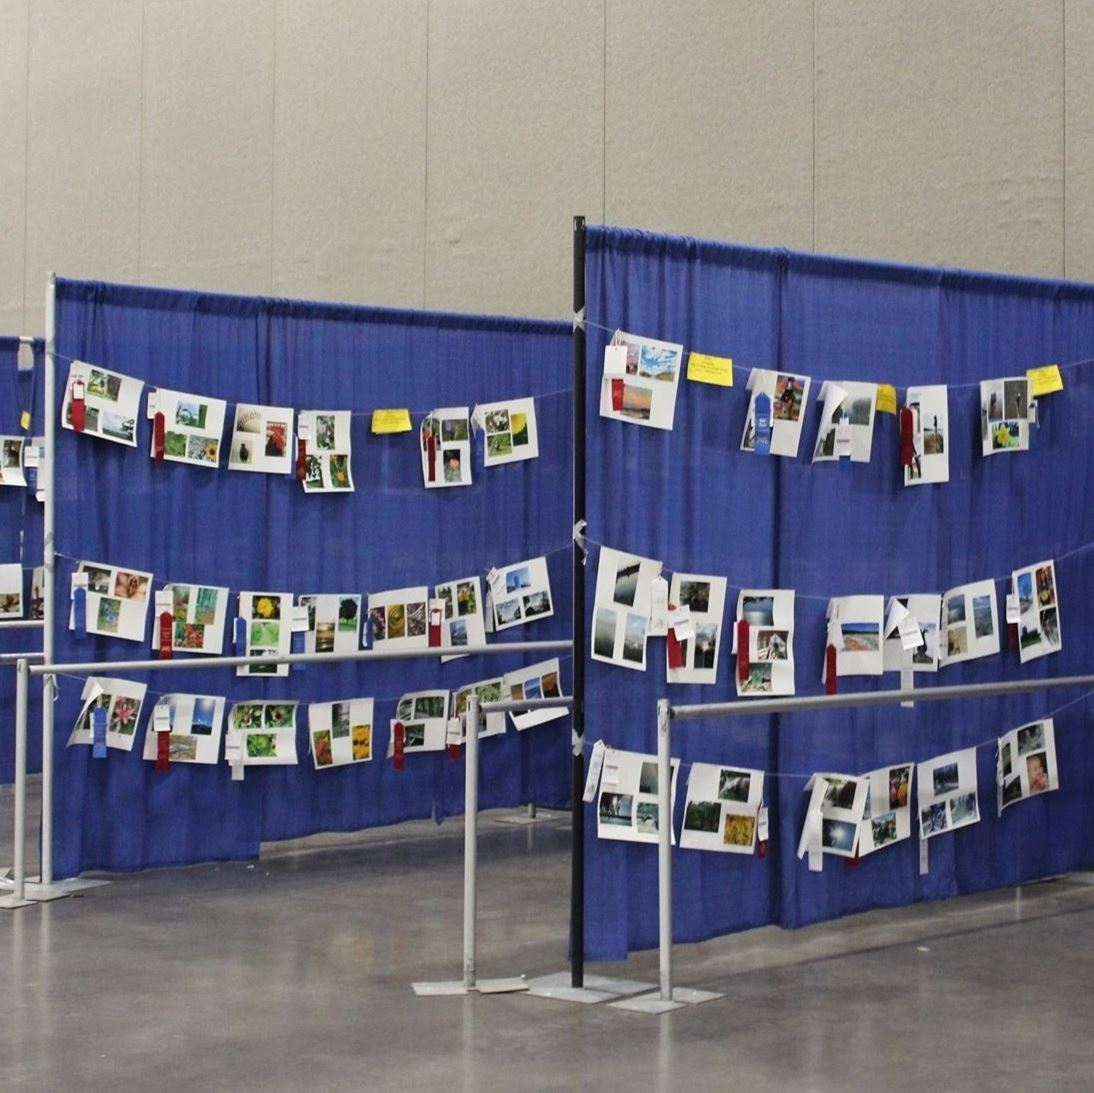 Youth Projects in the Exhibition Hall